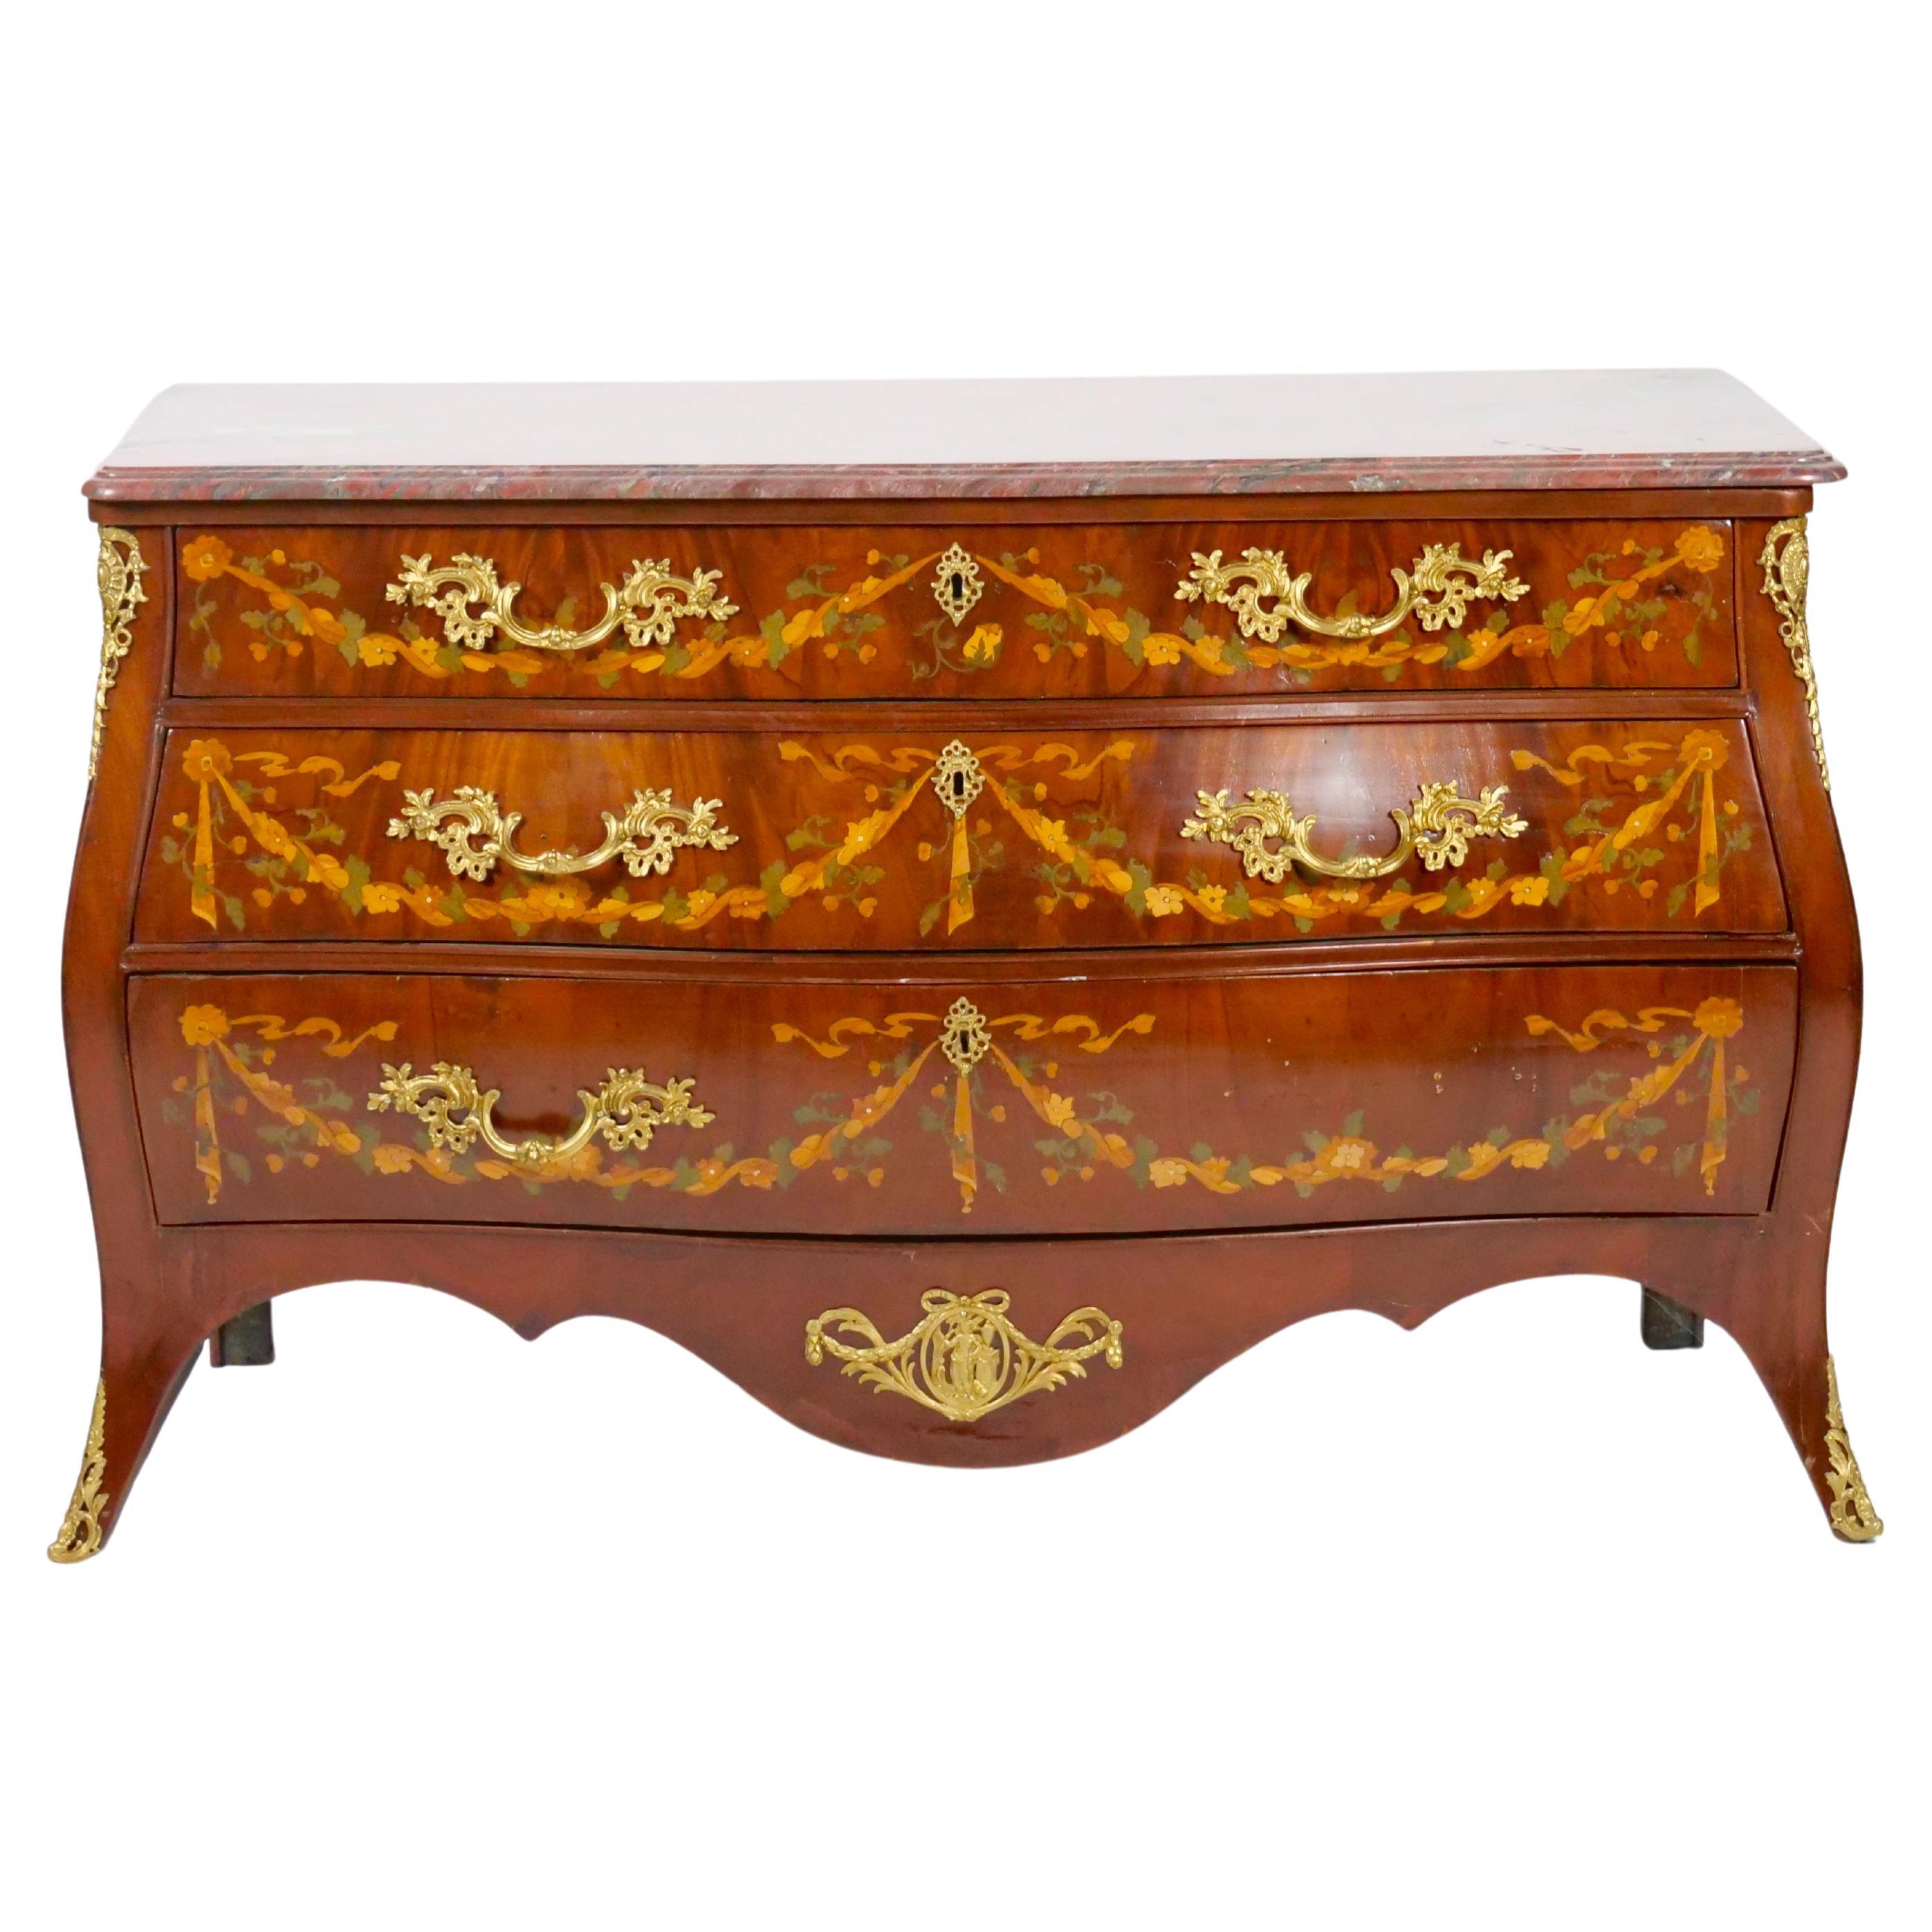 Antique Marble Top Floral Marquetry Inlaid Mahogany Commode / Credenza